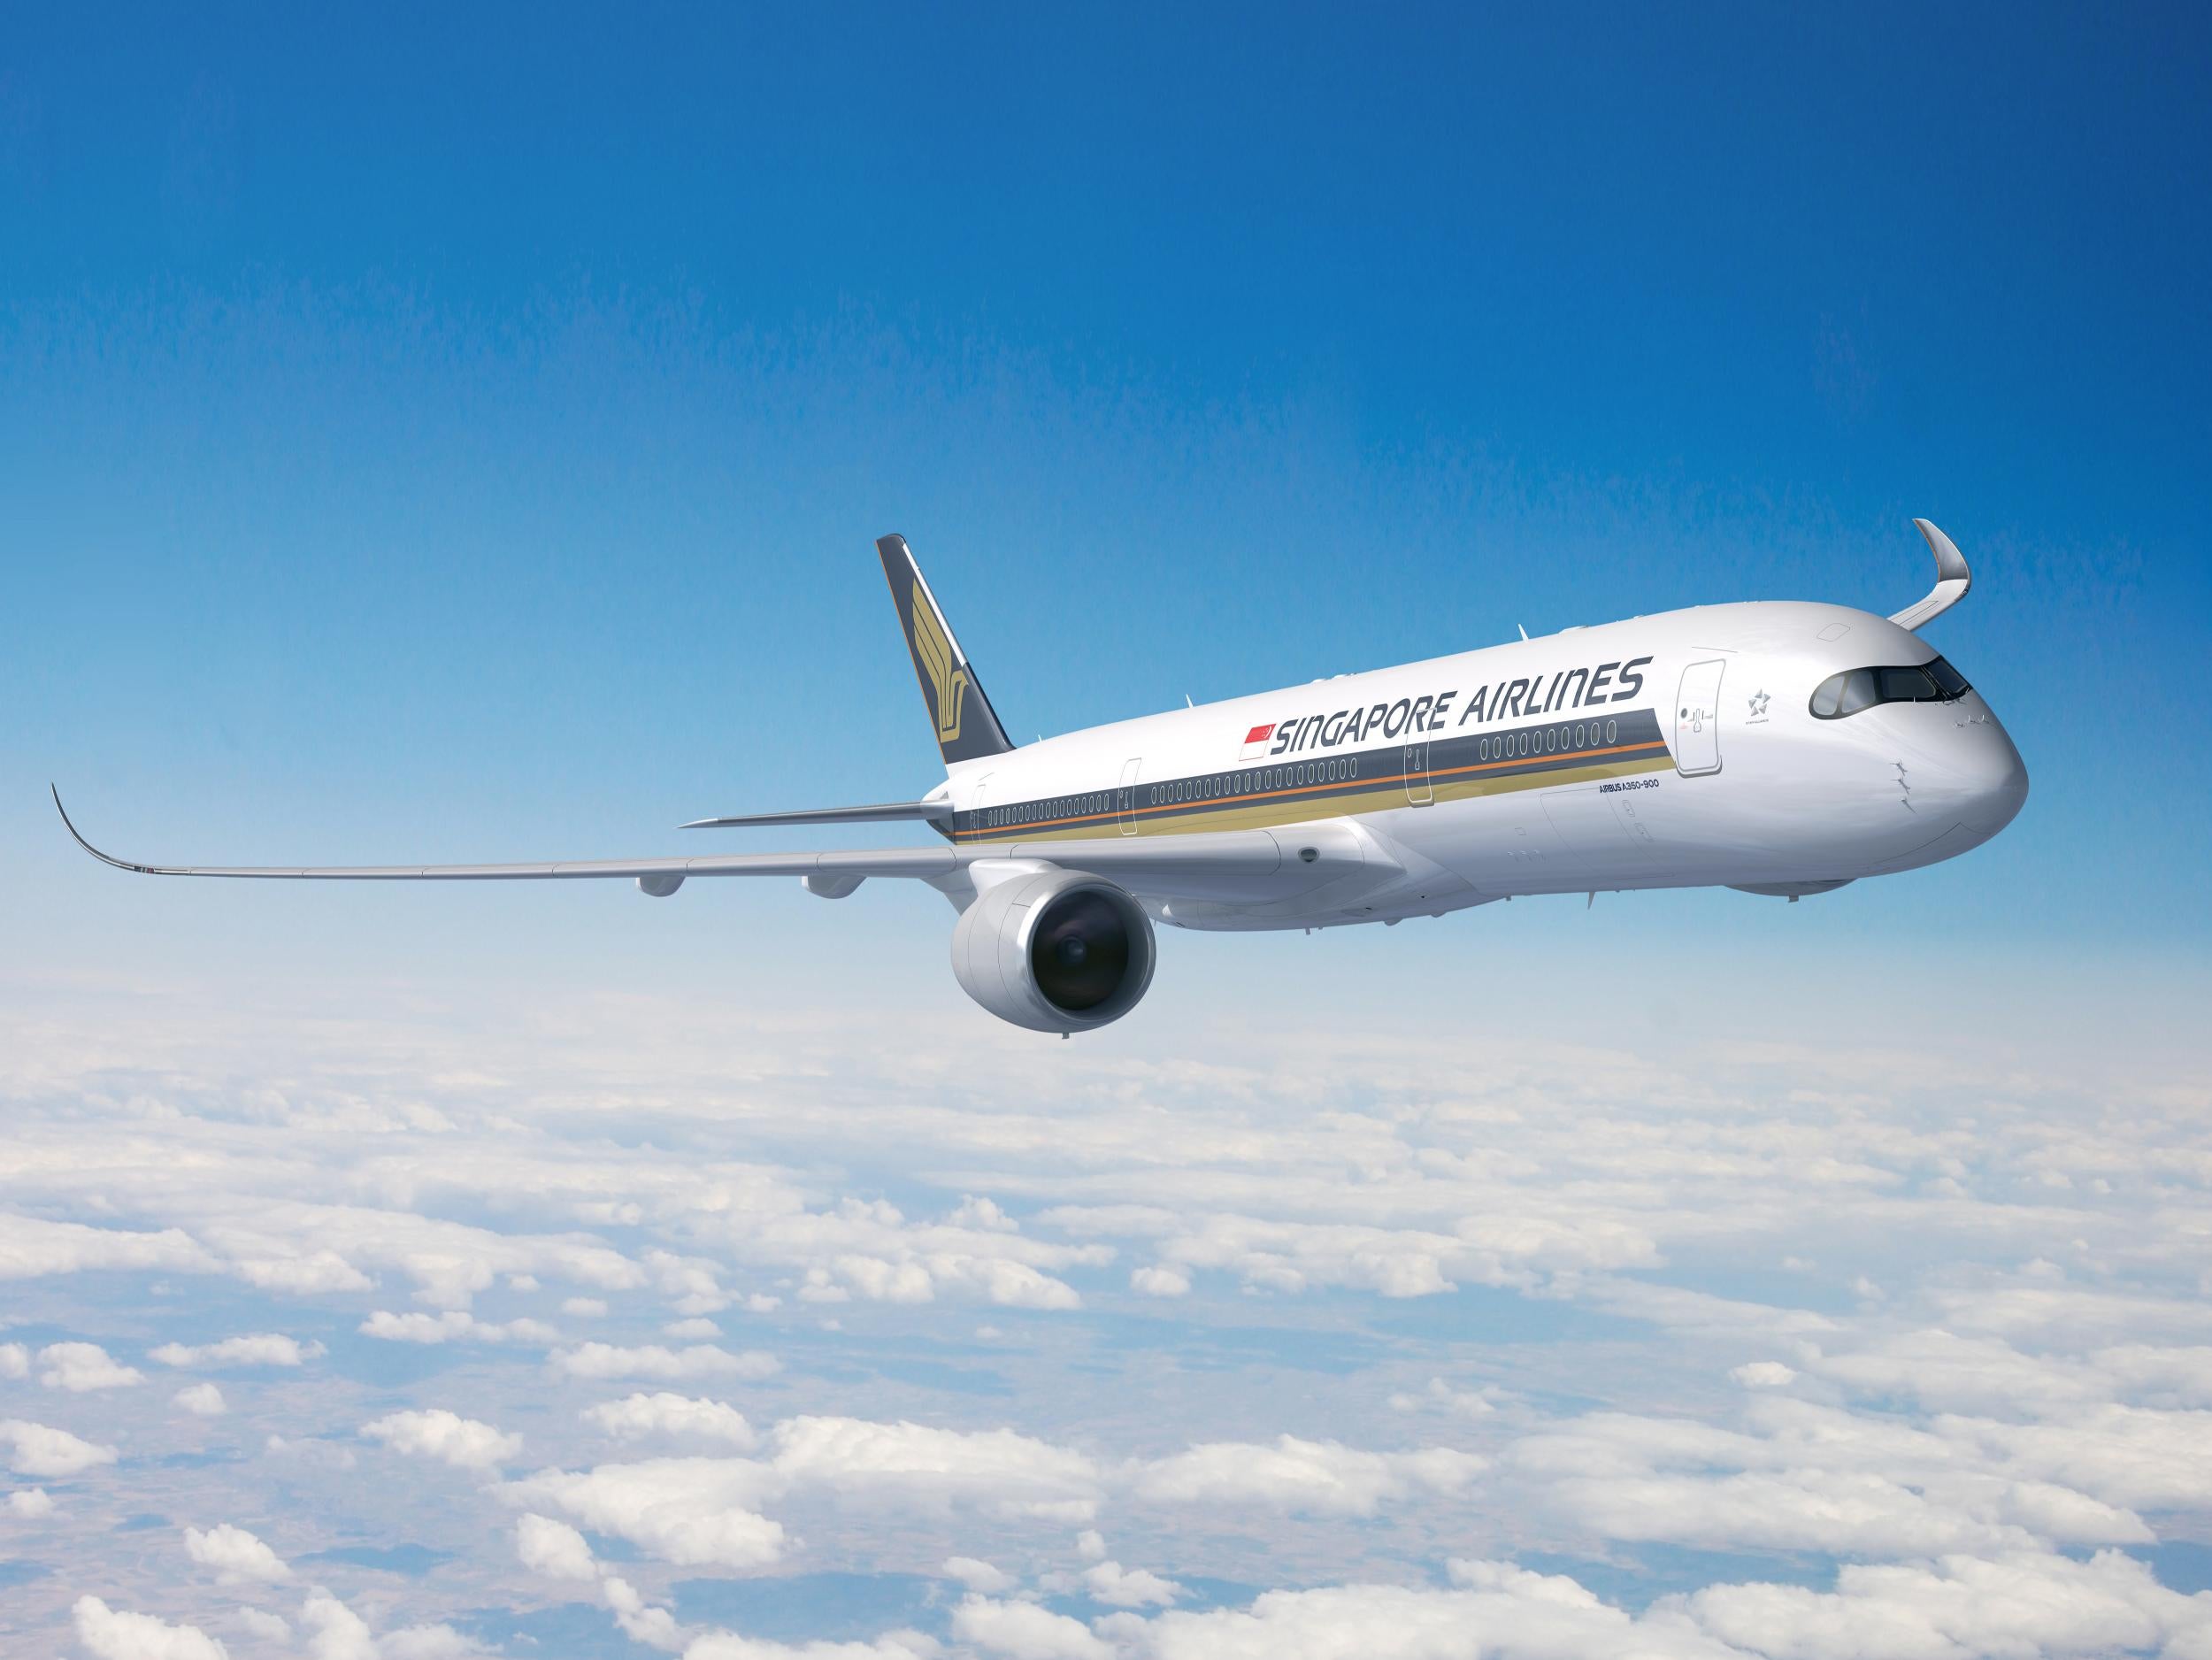 Singapore Airlines flight SQ22 from Singapore to New York is an 18-hour trip